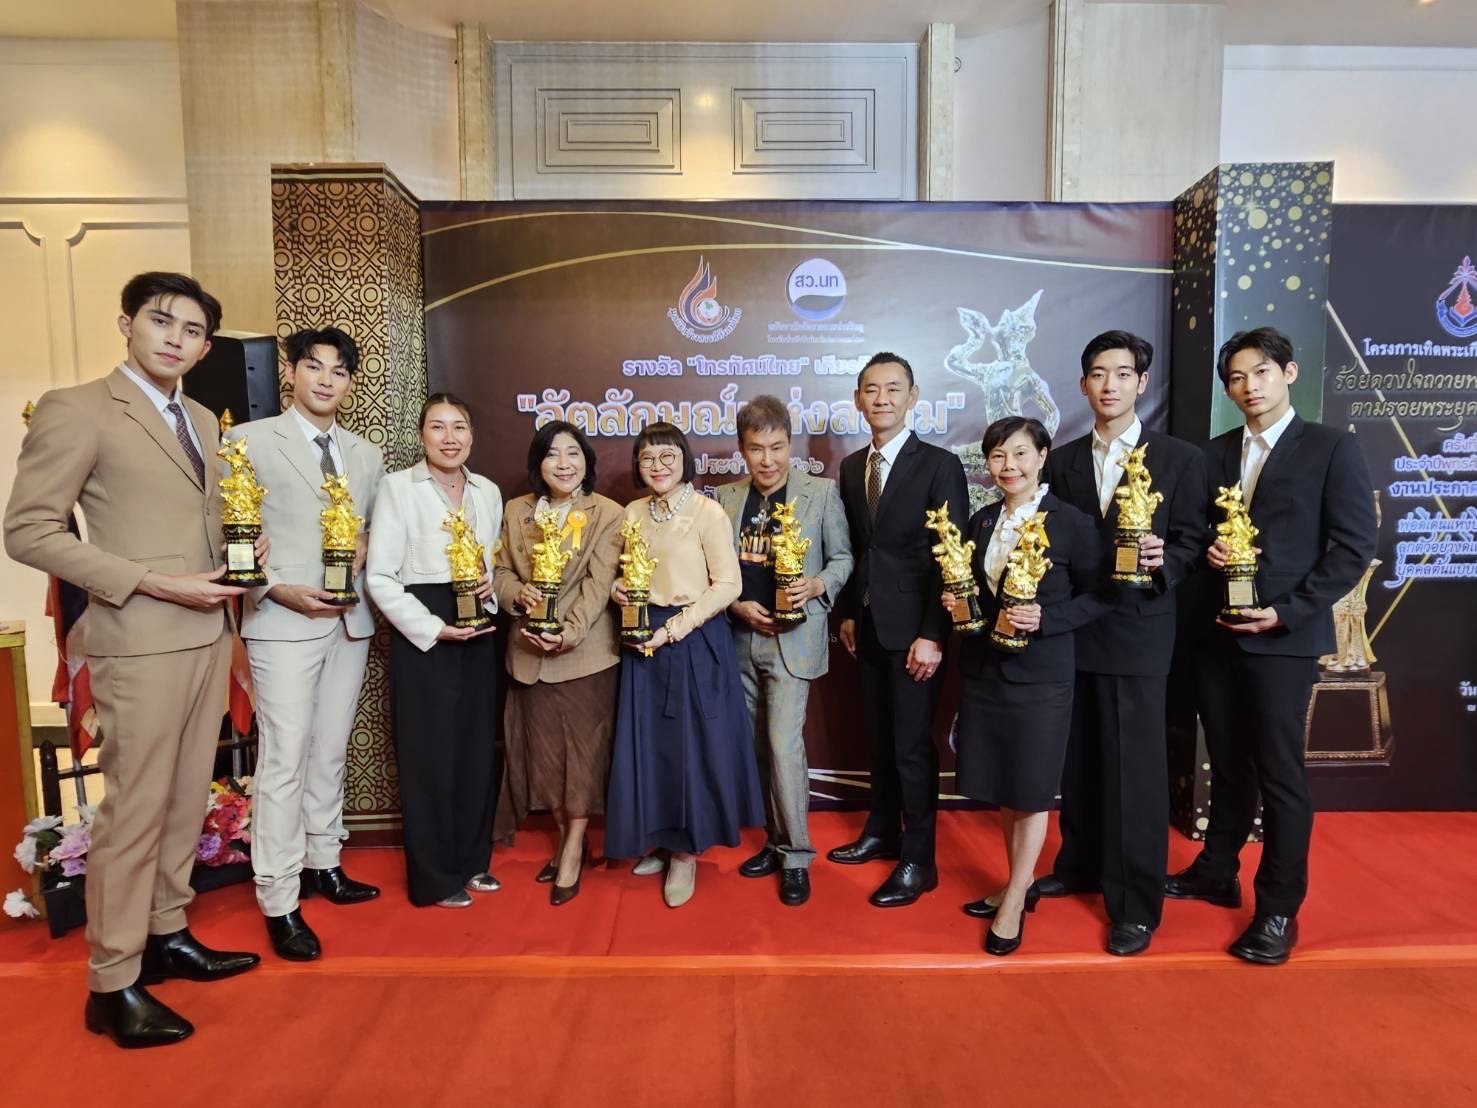 BEC was presented “Thai Television” fame “Identity of Siam” Awards 2023